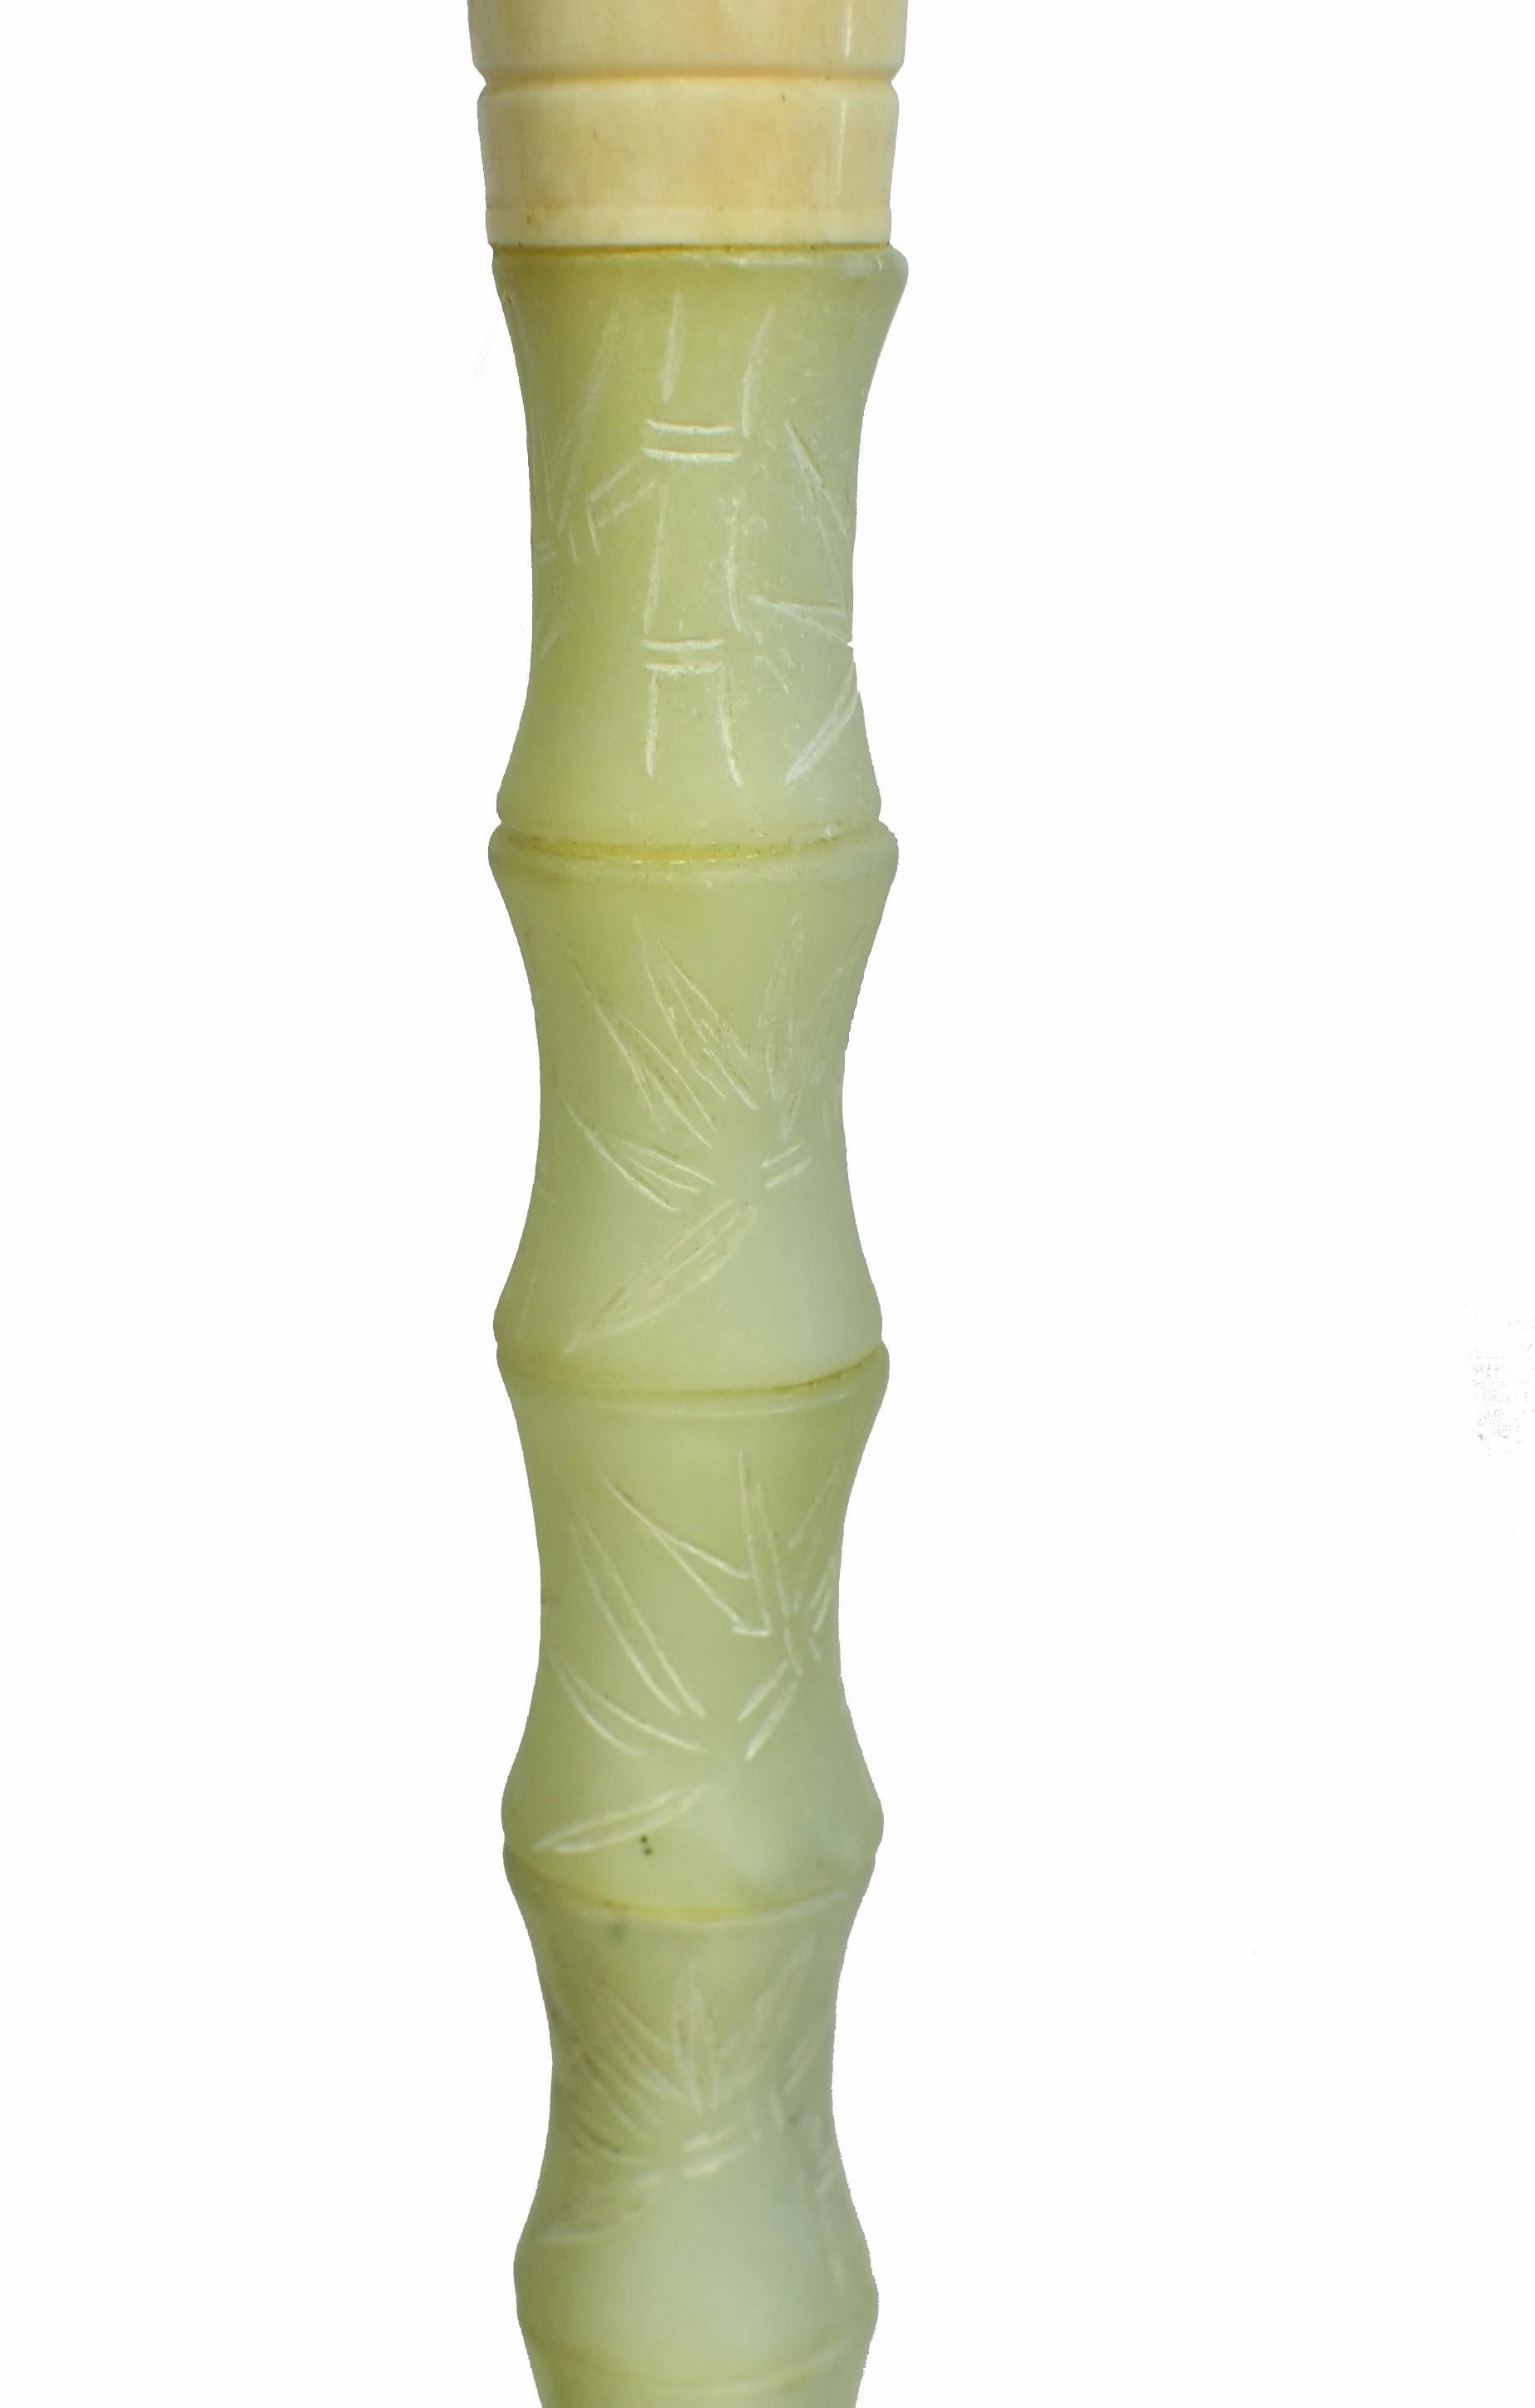 One of a kind, large green serpentine gemstone brush in bamboo form with carved bamboo leaves. Serpentine is a beautiful stone highly valued for its similarity to nephrite jade in celadon color and lustrous texture. Bone ferrule and horse hair.